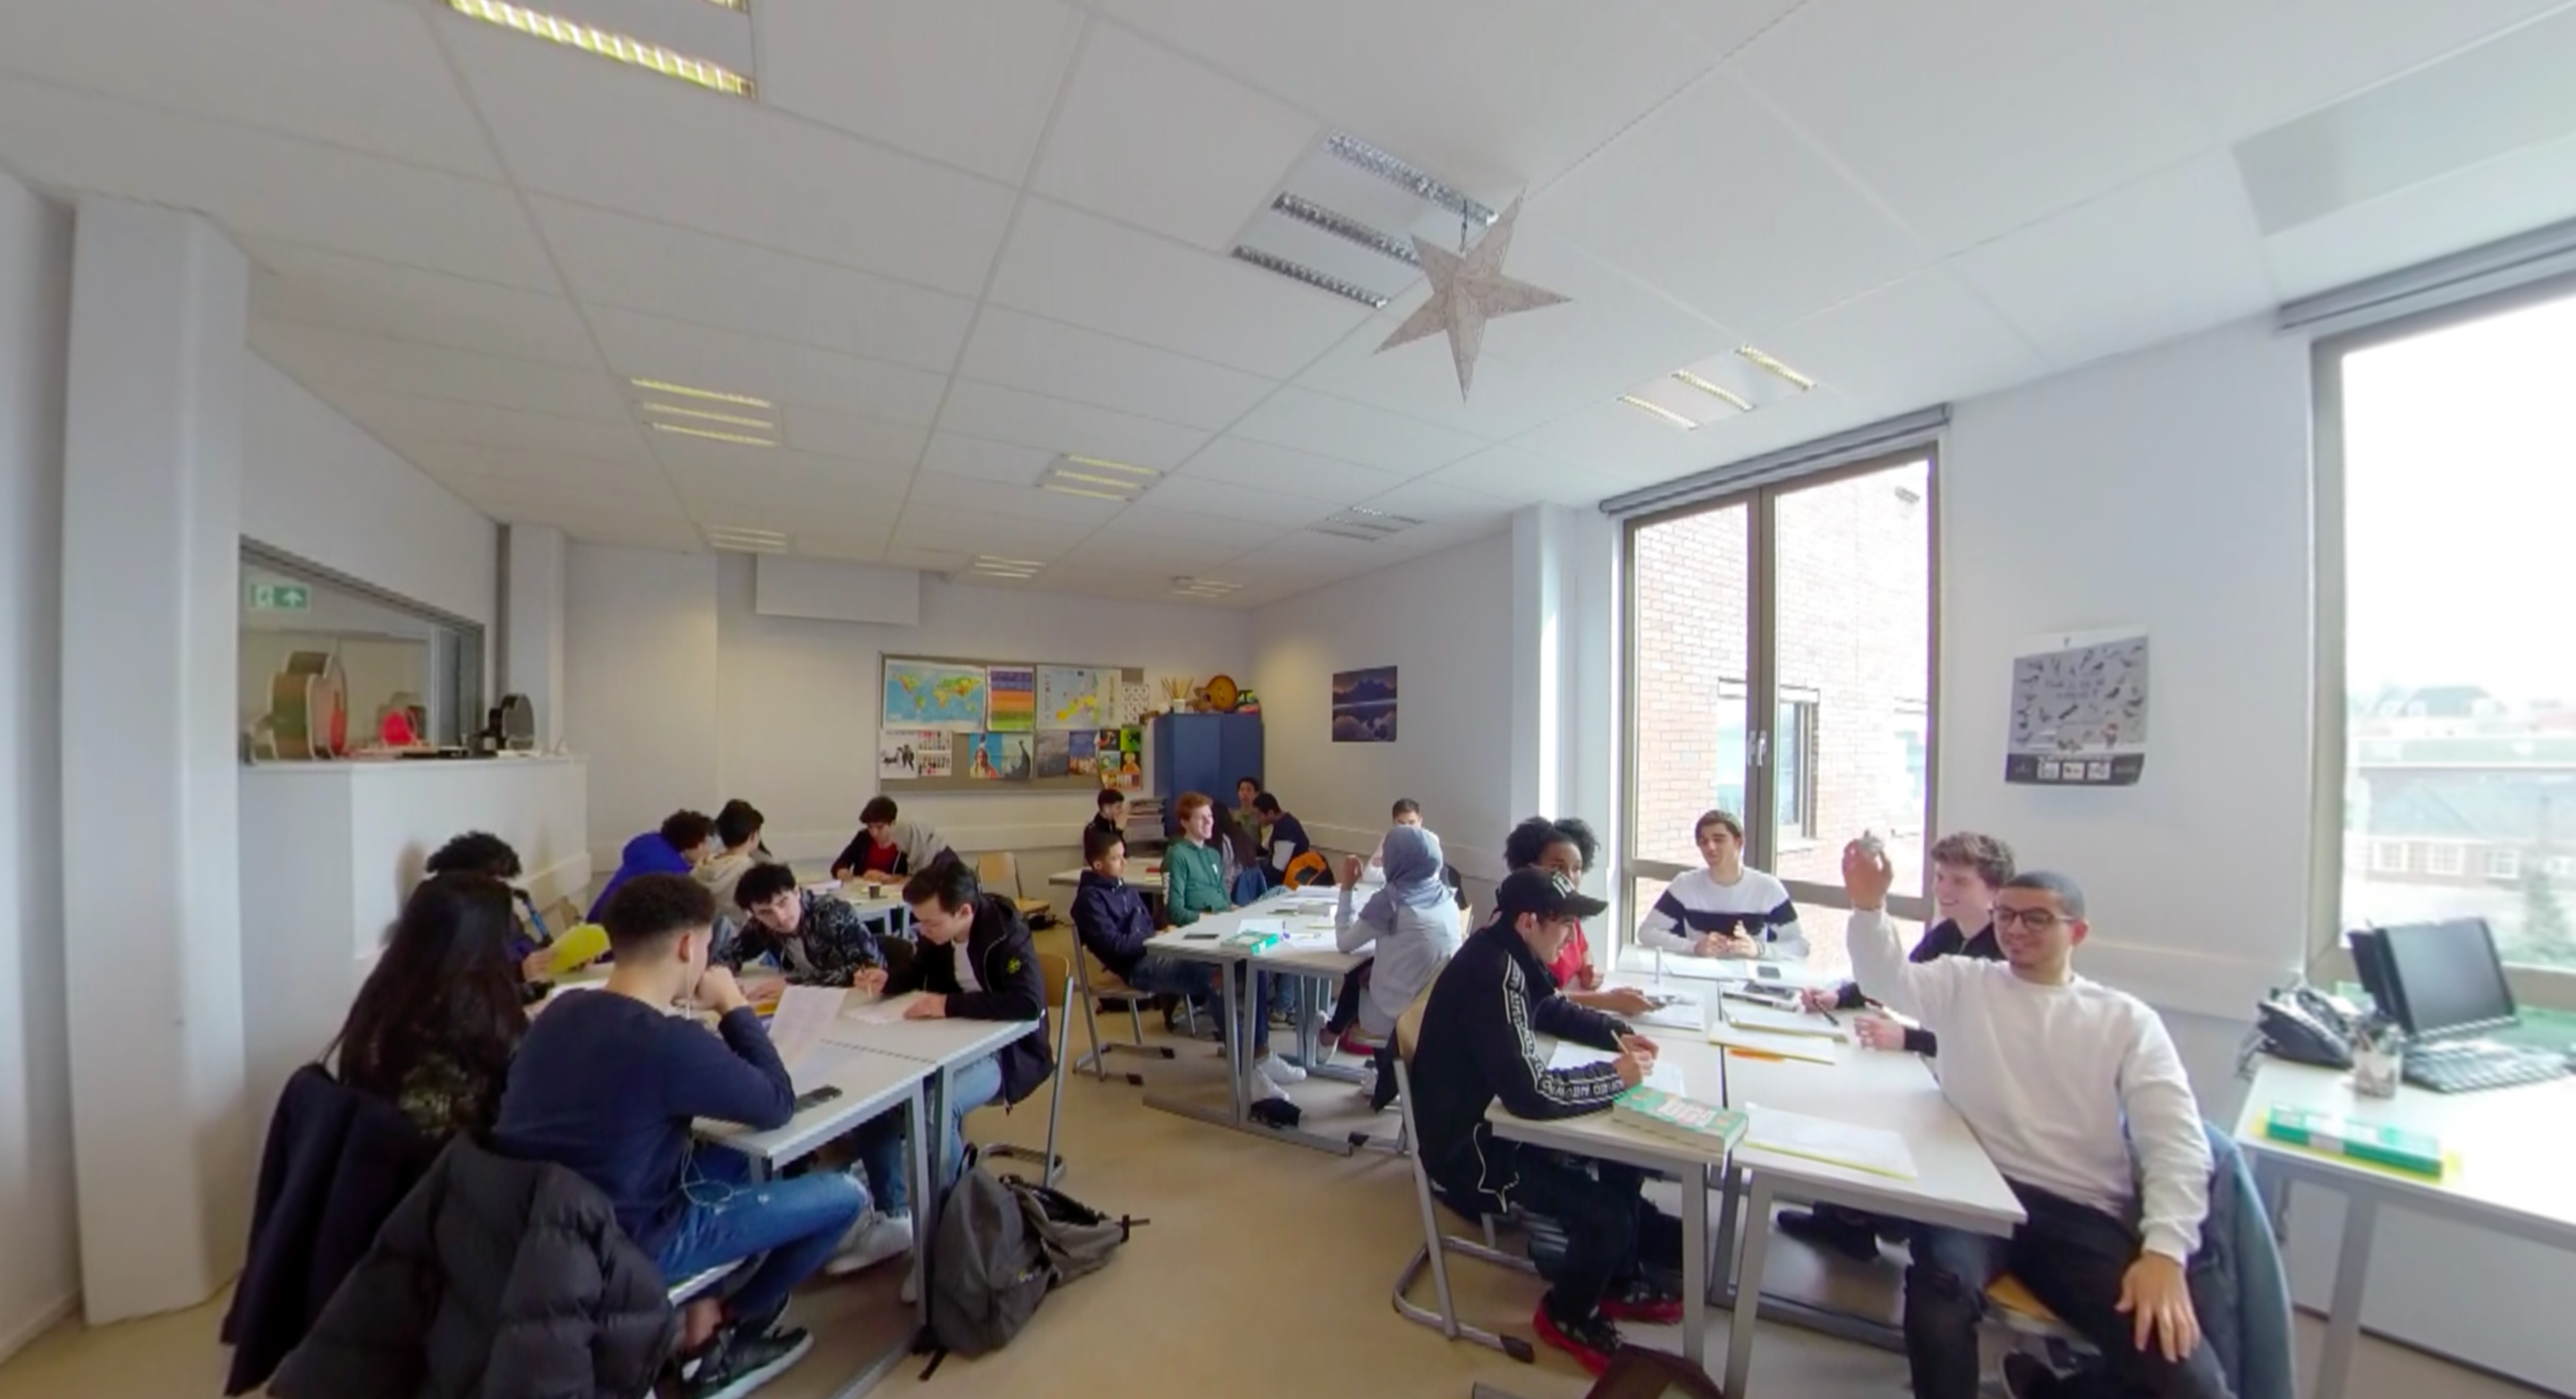 360° video is used to capture different classroom situations